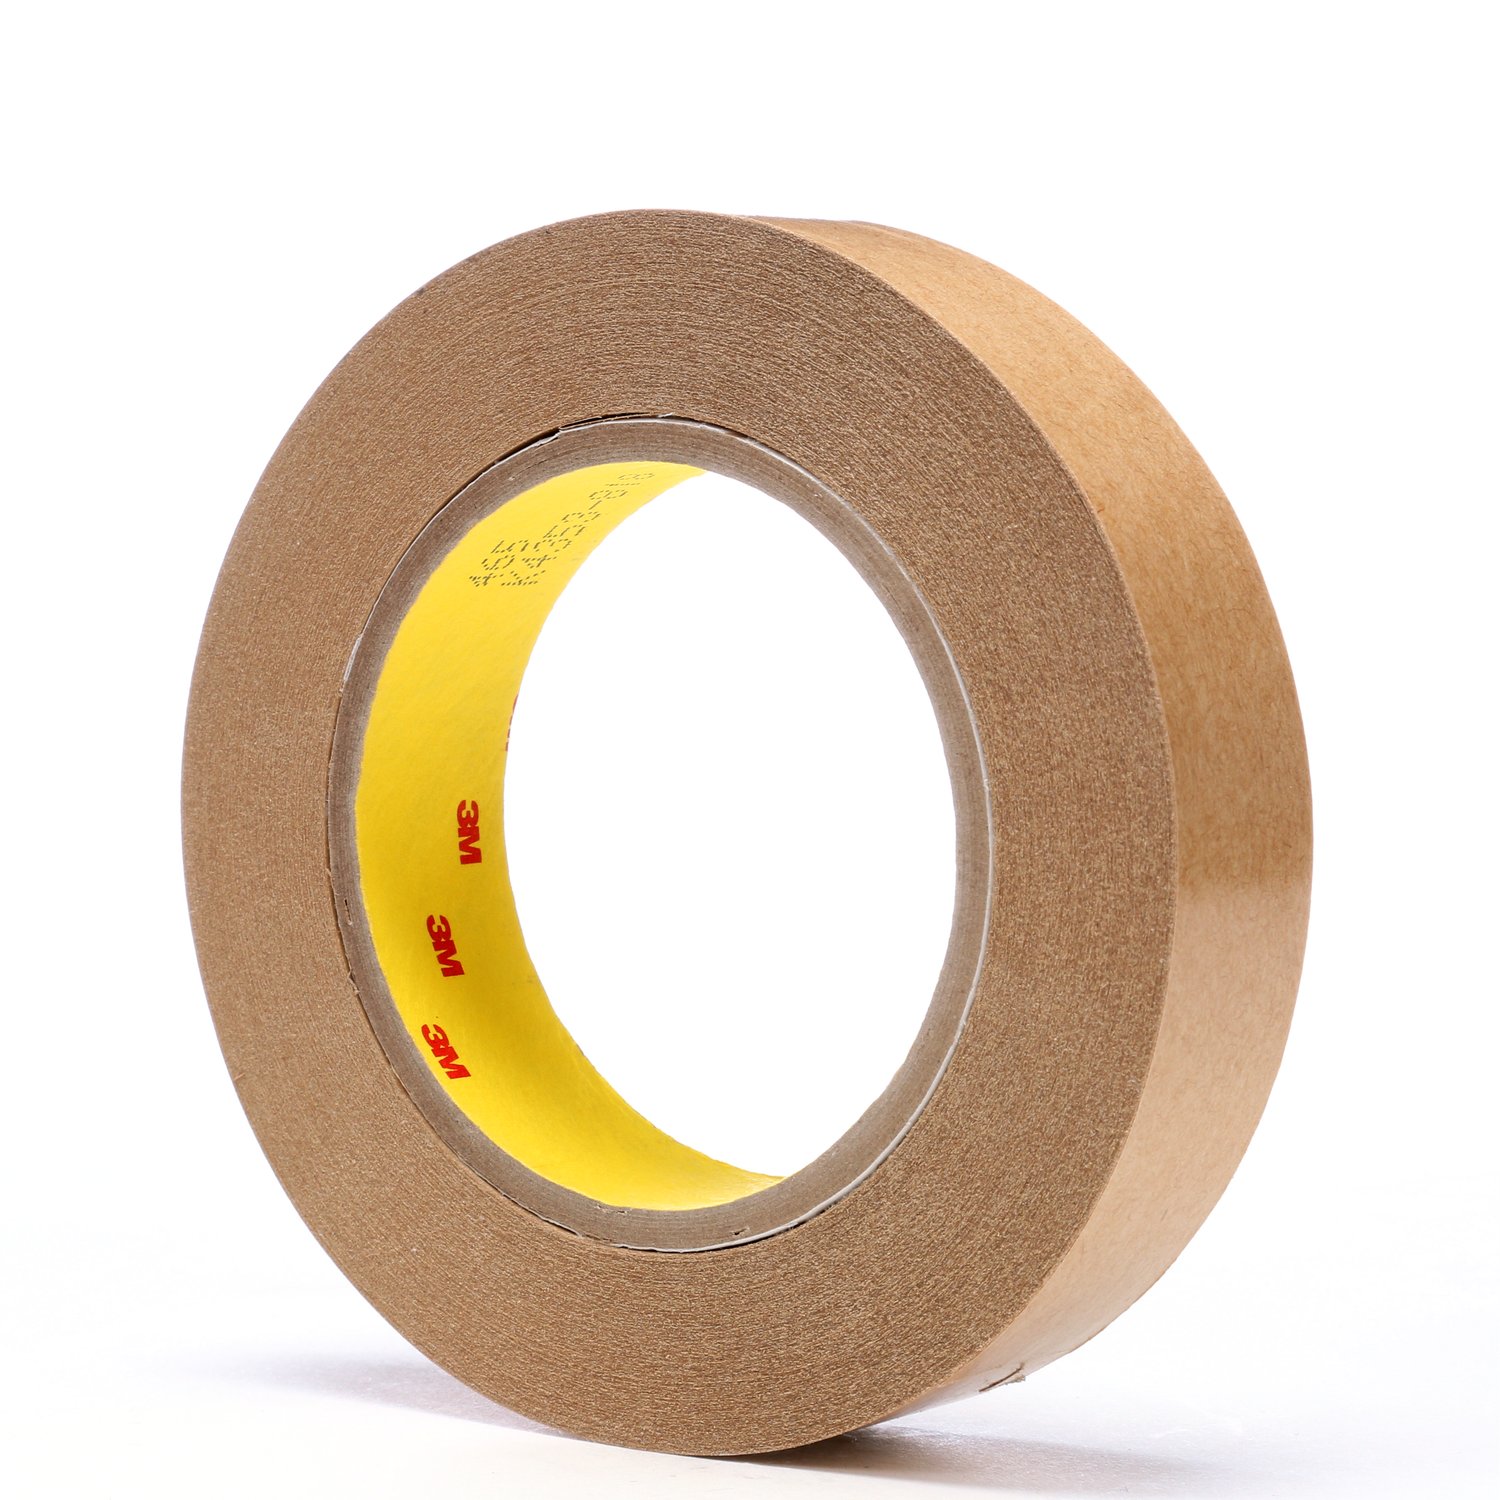 7000028663 - 3M Adhesive Transfer Tape 465, Clear, 1 in x 60 yd, 2 mil, 36 rolls per
case